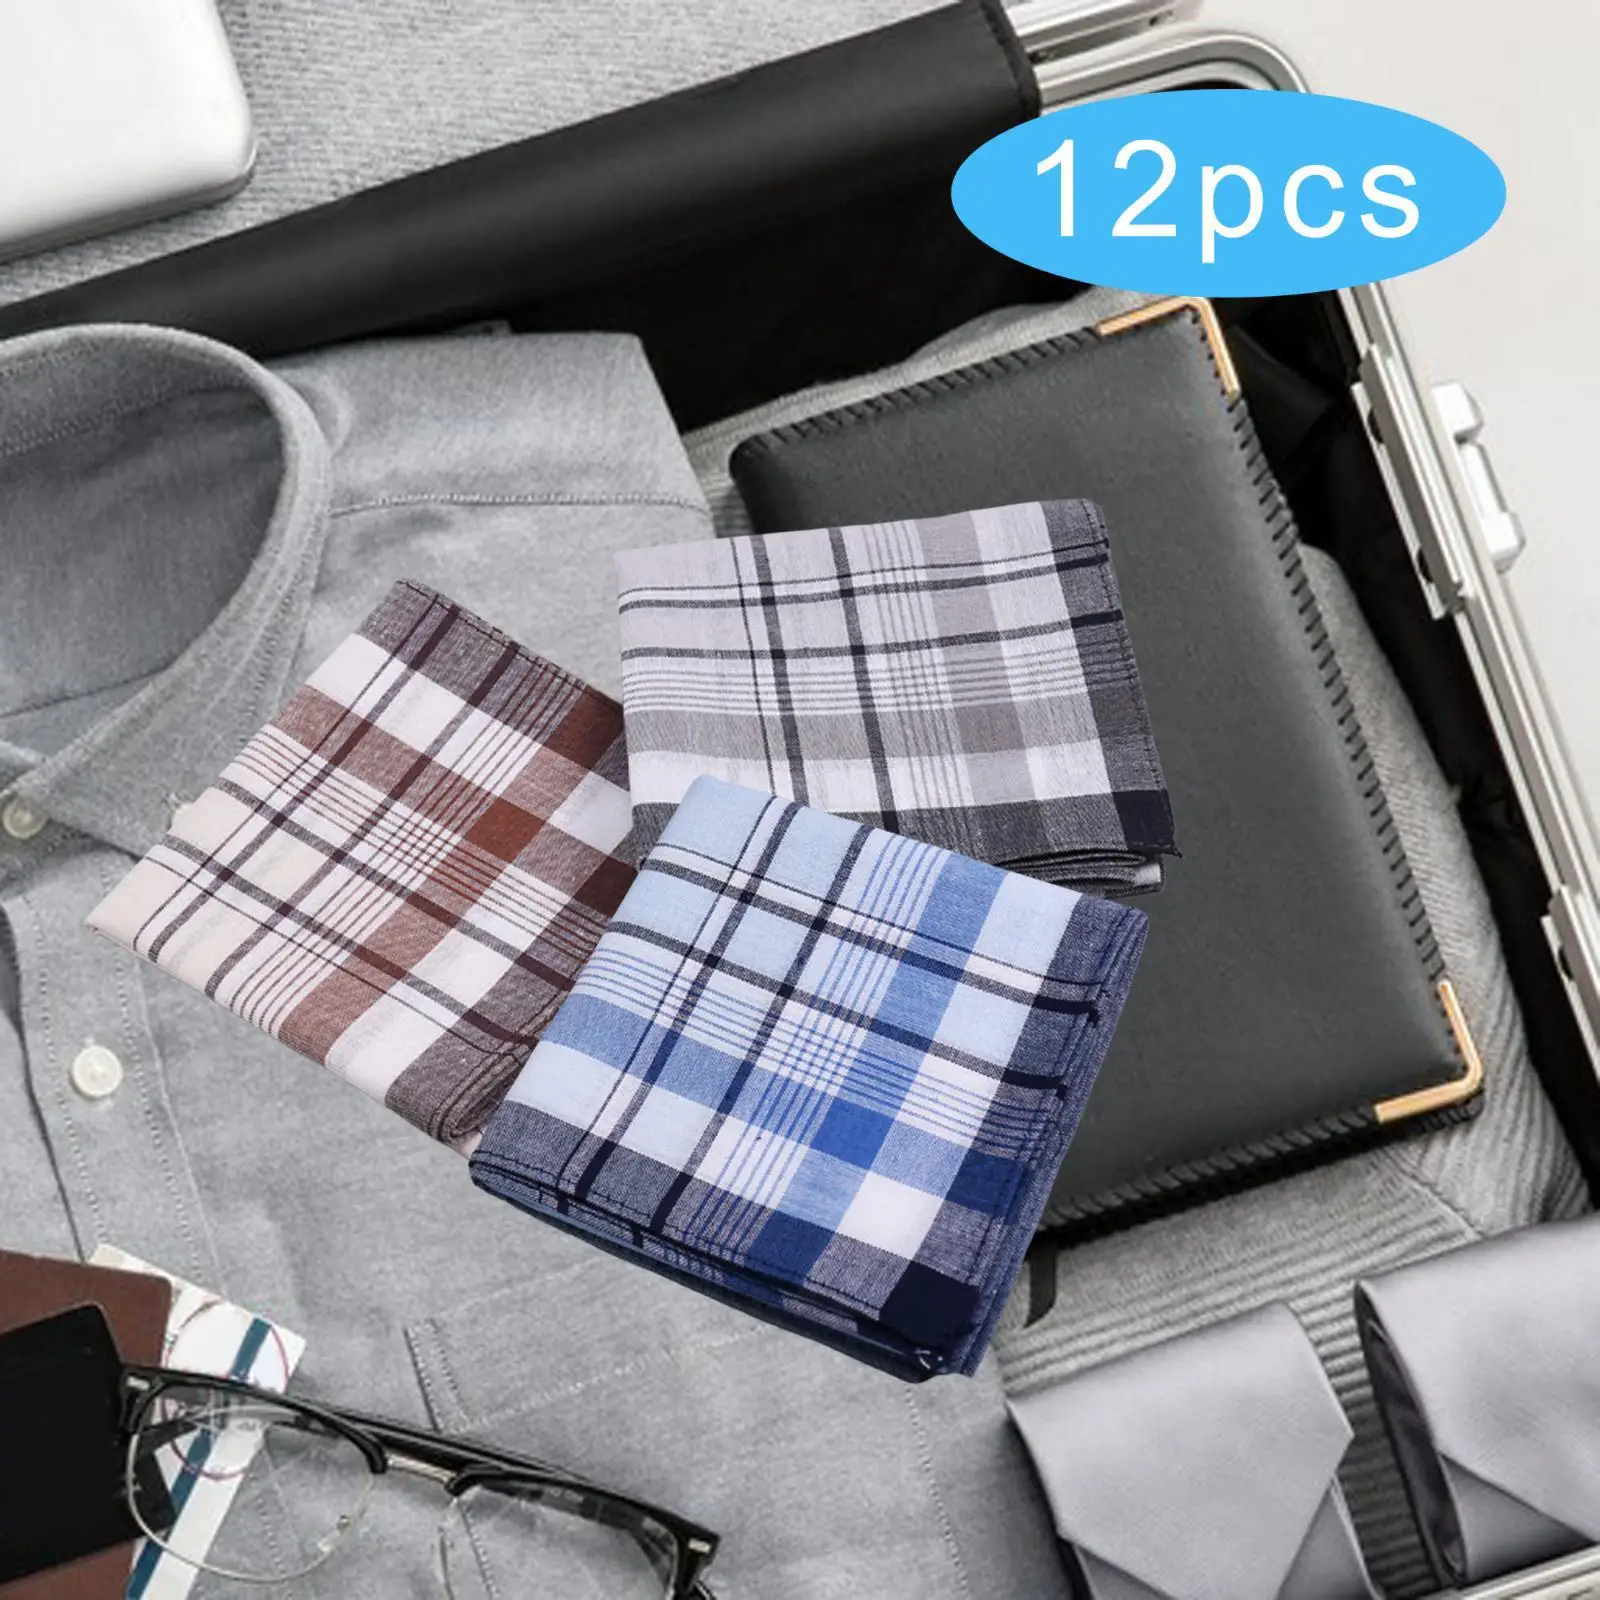 12Pcs Cotton Men`s Handkerchiefs Gifts 40x40cm Wipe The Sweat Towels Kerchief Hanky for Grooms Casual Grandfathers Suit Birthday